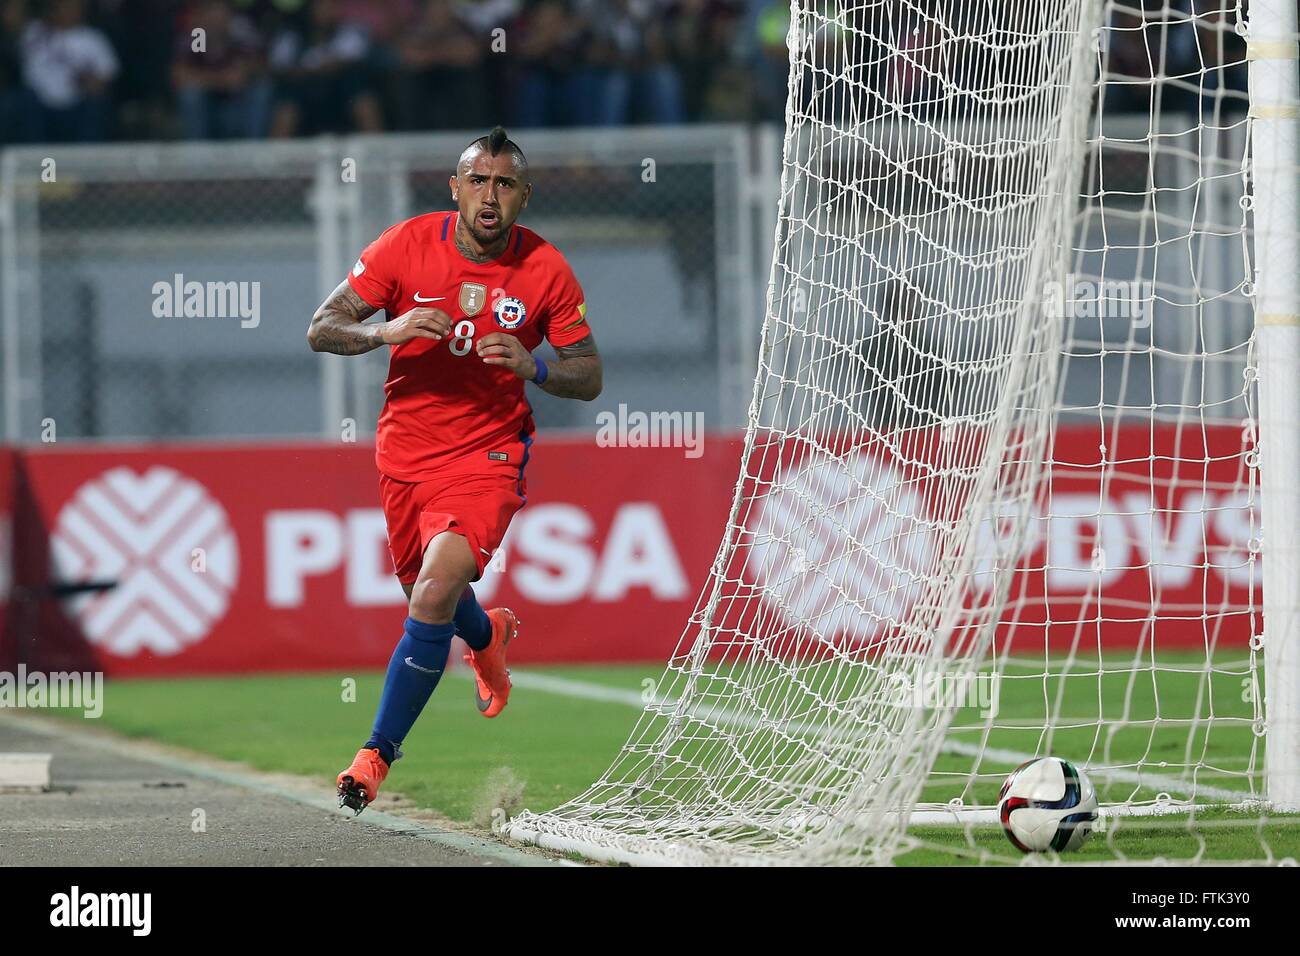 Barinas, Venezuela. 29th Mar, 2016. Image provided by Chile's National Professional Football Association (ANFP, for its acronym in Spanish) shows Chile's Arturo Vidal celebrating after scoring during the qualifying match for 2018 Russia World Cup against Venezuela at Agustin Tovar Stadium in Barinas, Venezuela, on March 29, 2016. Chile won 4-1. © ANFP/Xinhua/Alamy Live News Stock Photo